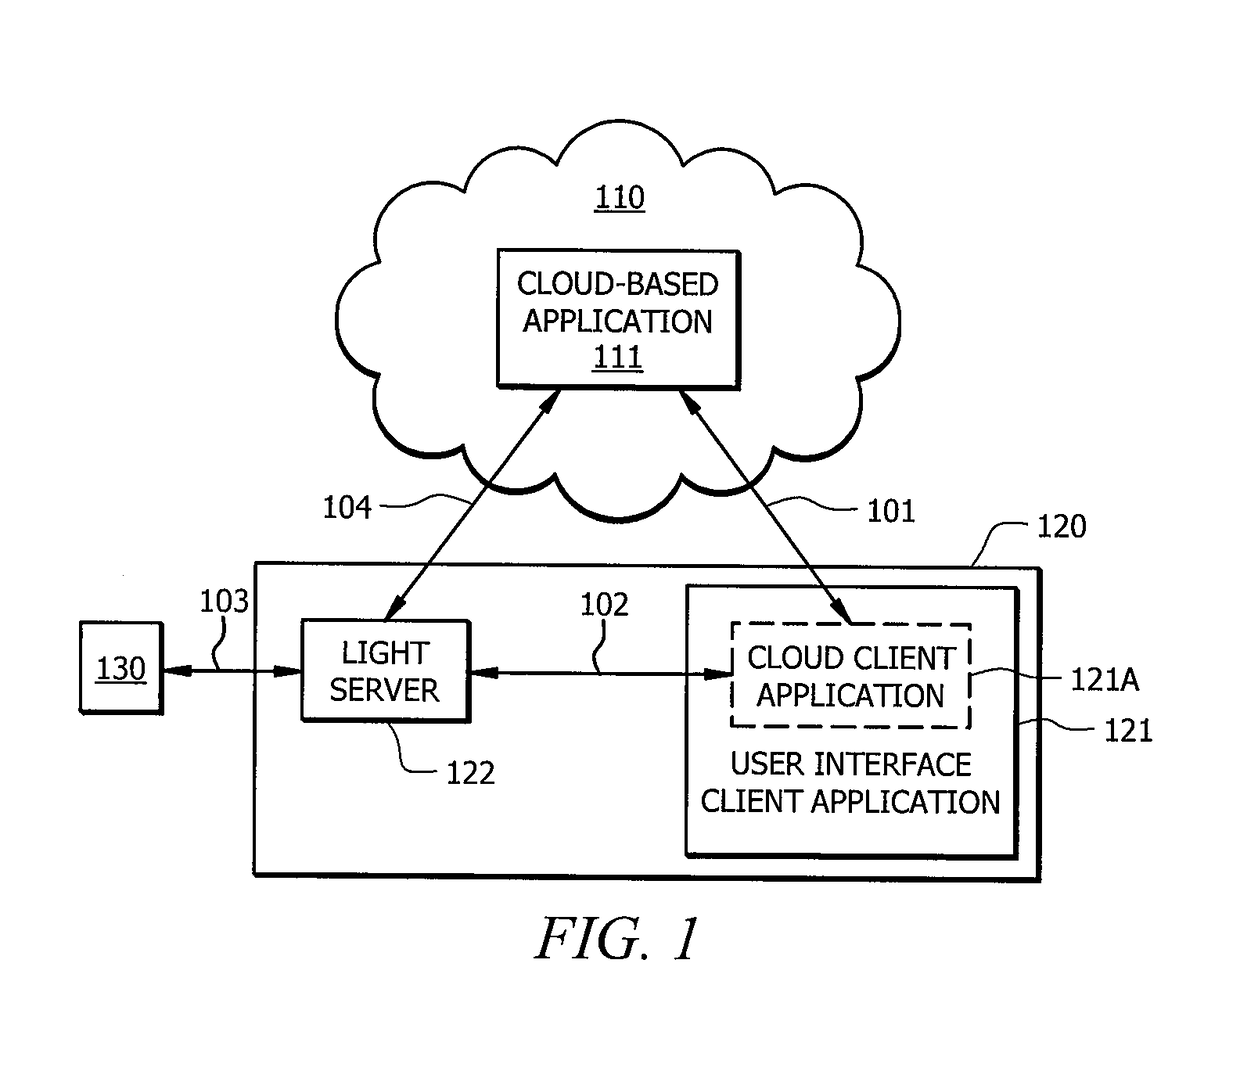 Systems and methods for cloud-based application access to resources